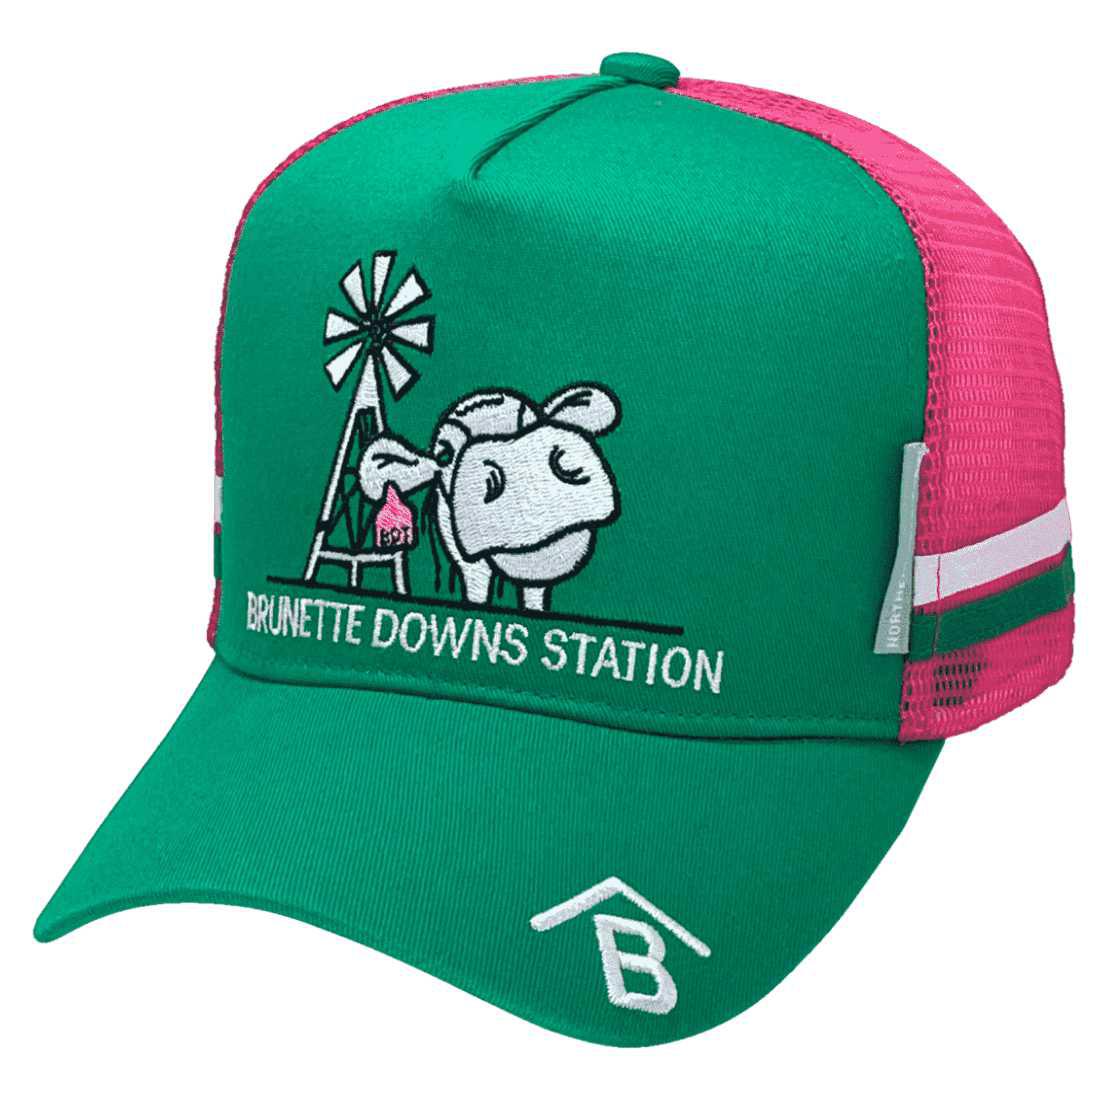 Brunette Downs Station AACo Barkley Tablelands Qld HP Midrange Aussie Trucker Hat with Australian Head Fit Crown and 2 Side Bands